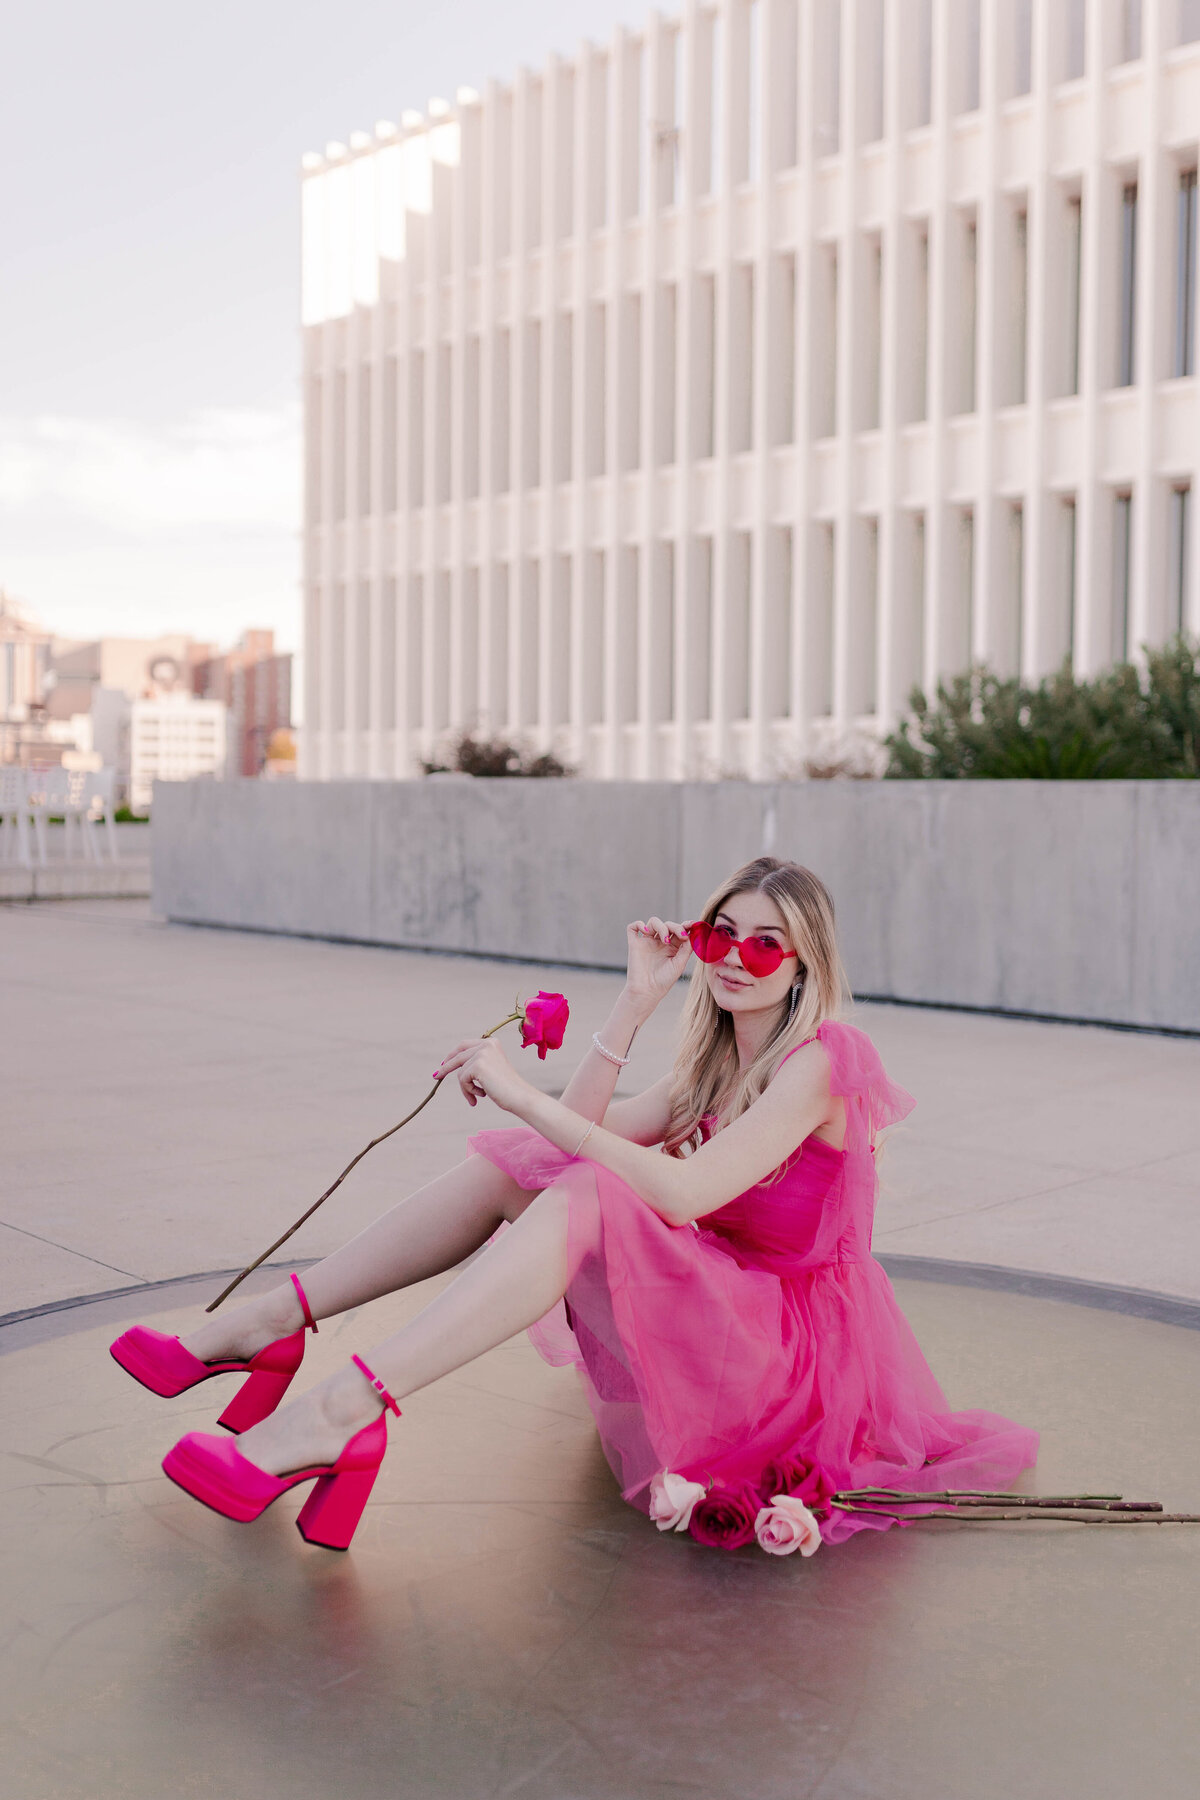 barbie model holds a pink rose while wearing hot pink heart-shaped sunglasses in rooftop in houston